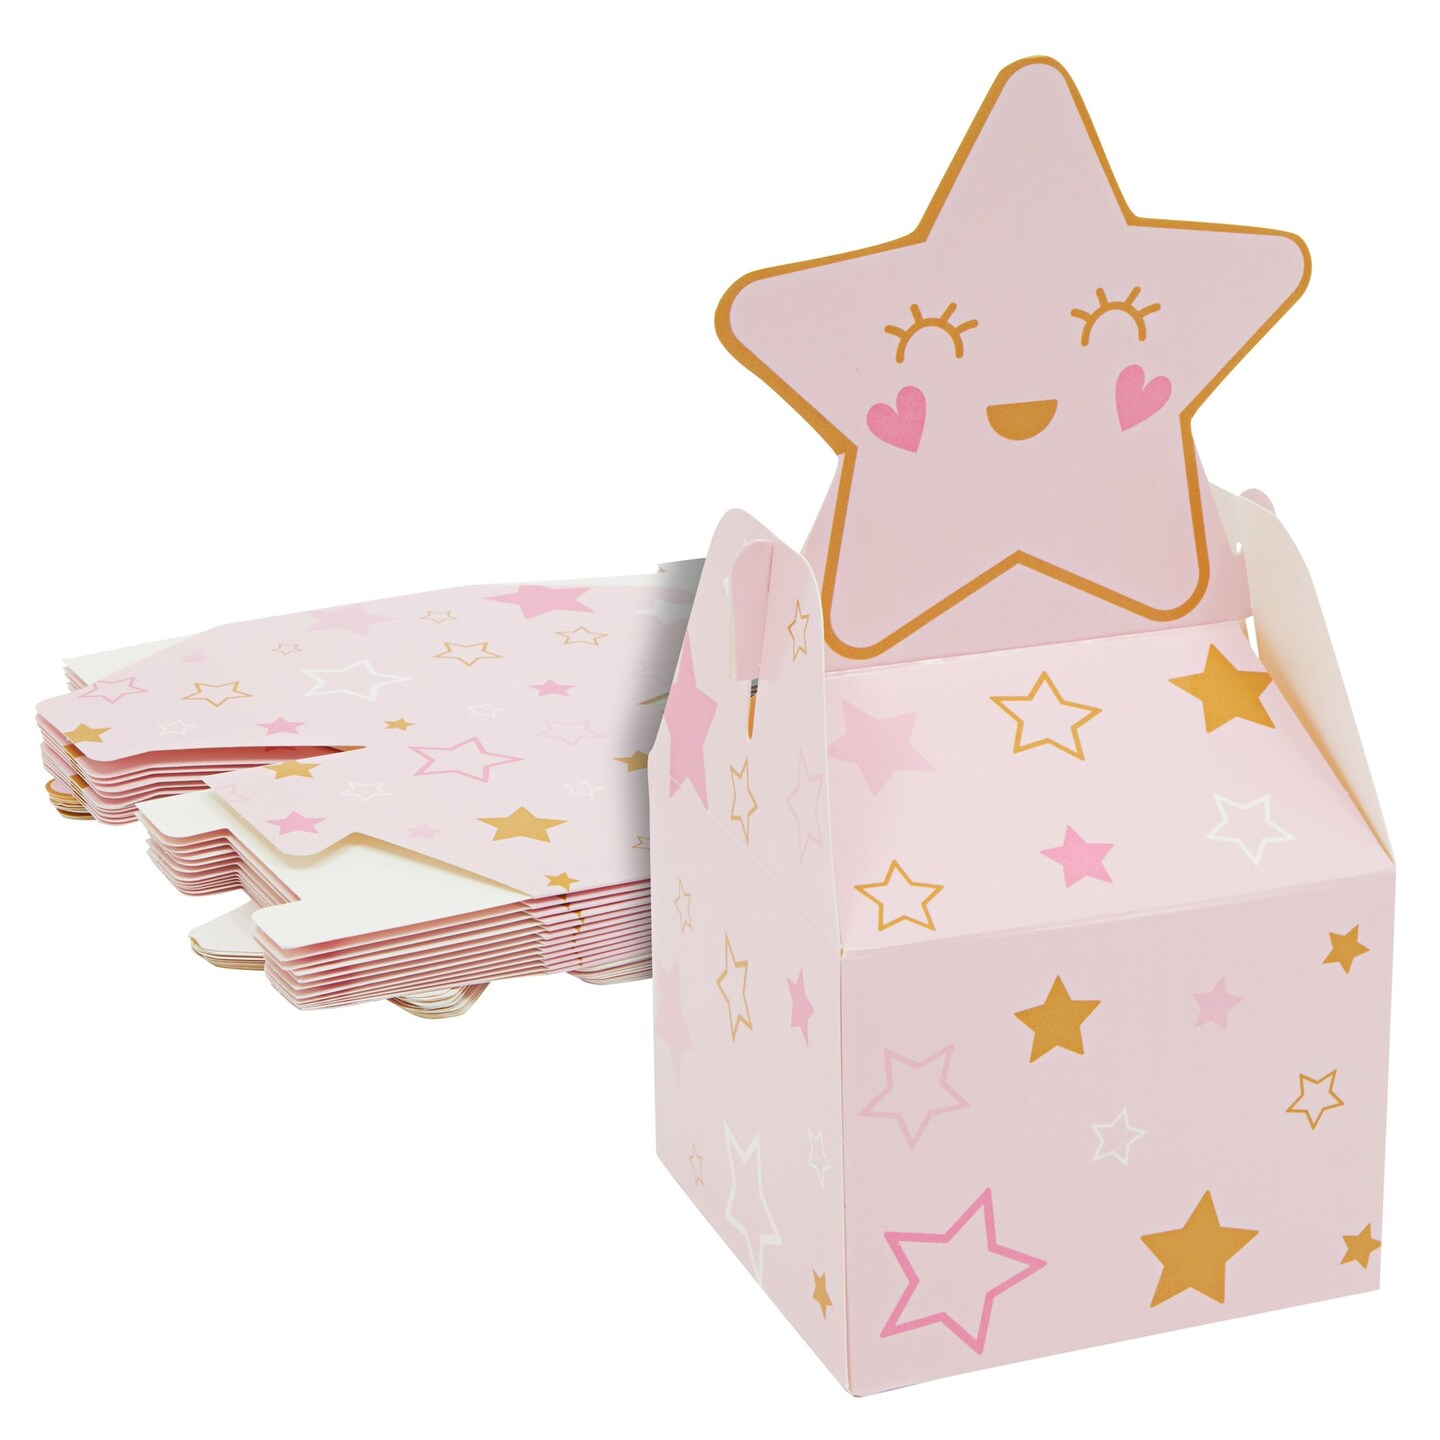 24 Pack Pink Star Themed Party Favor Gable Treat Boxes for Girls Twinkle Twinkle Little Star Baby Shower Decorations (4 x 8 In)